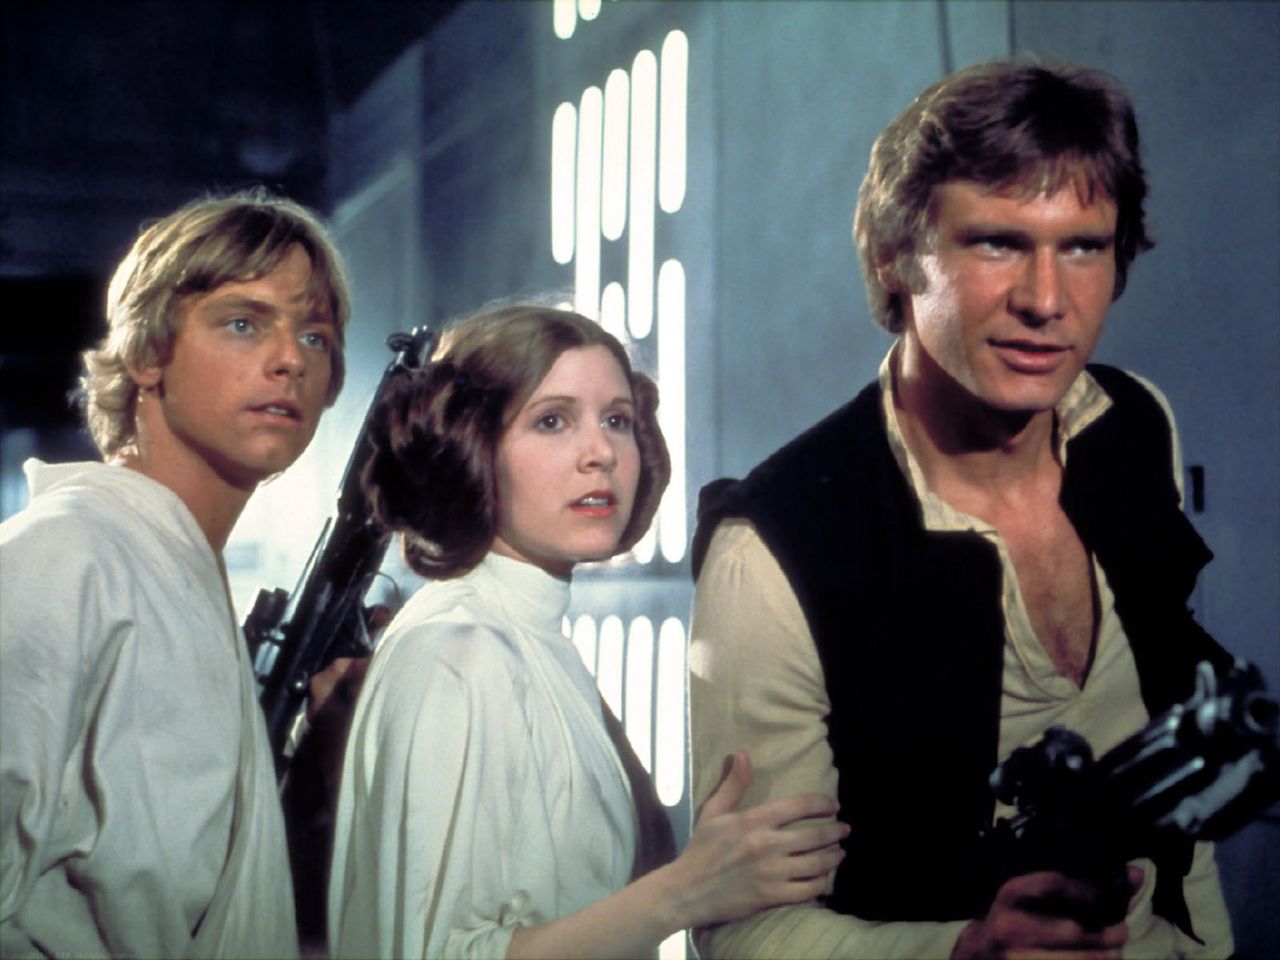 Is Star Wars a science fiction movie?